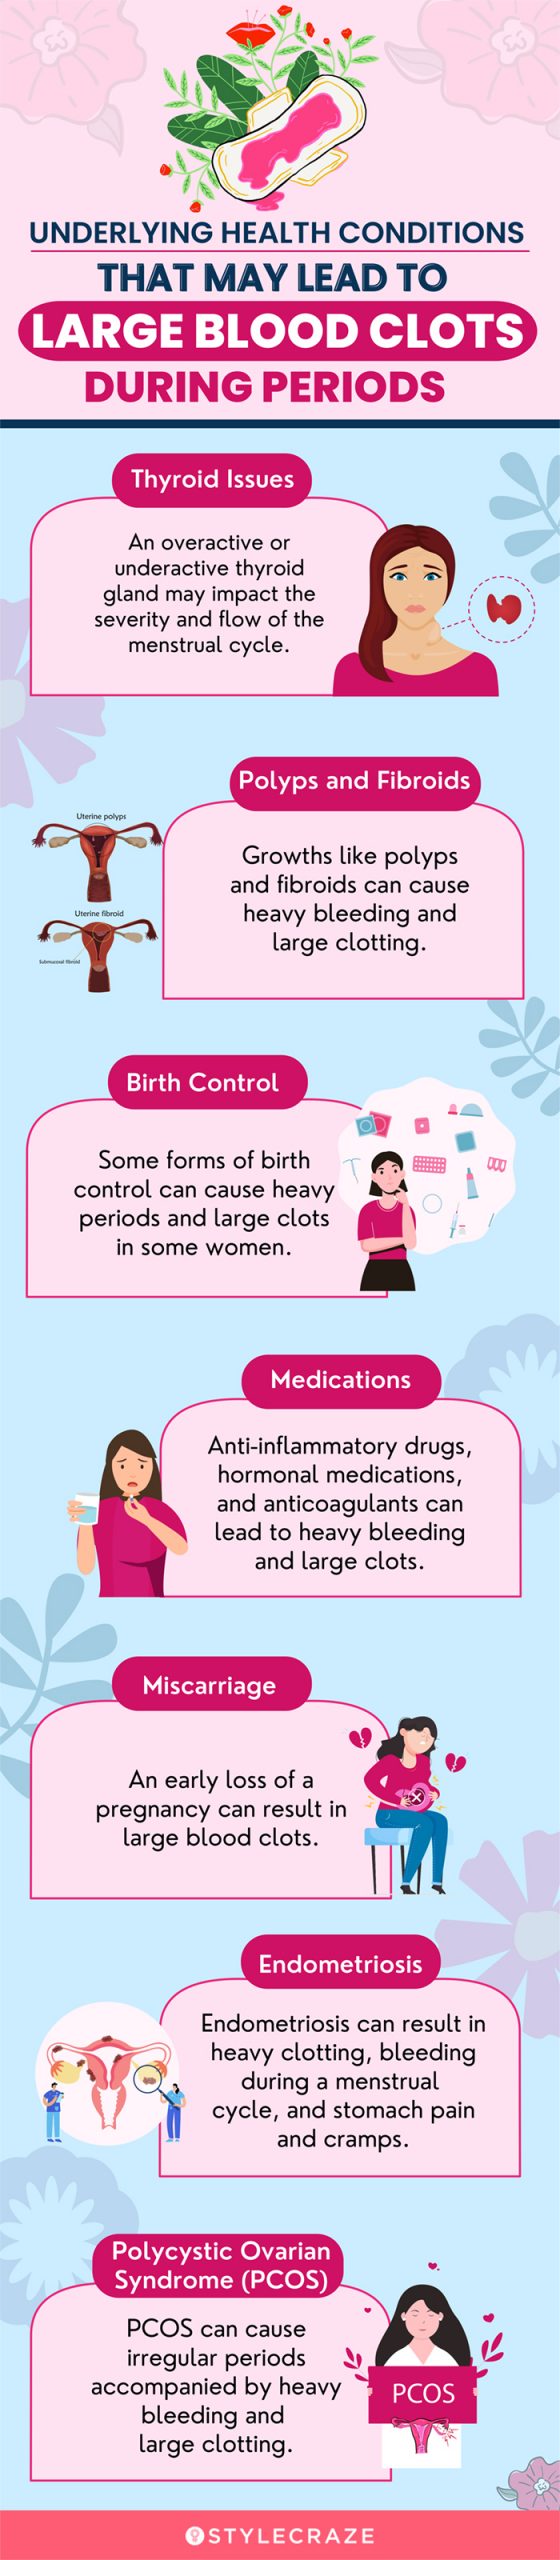 underlying health conditions that may lead to large blood clots during periods (infographic)